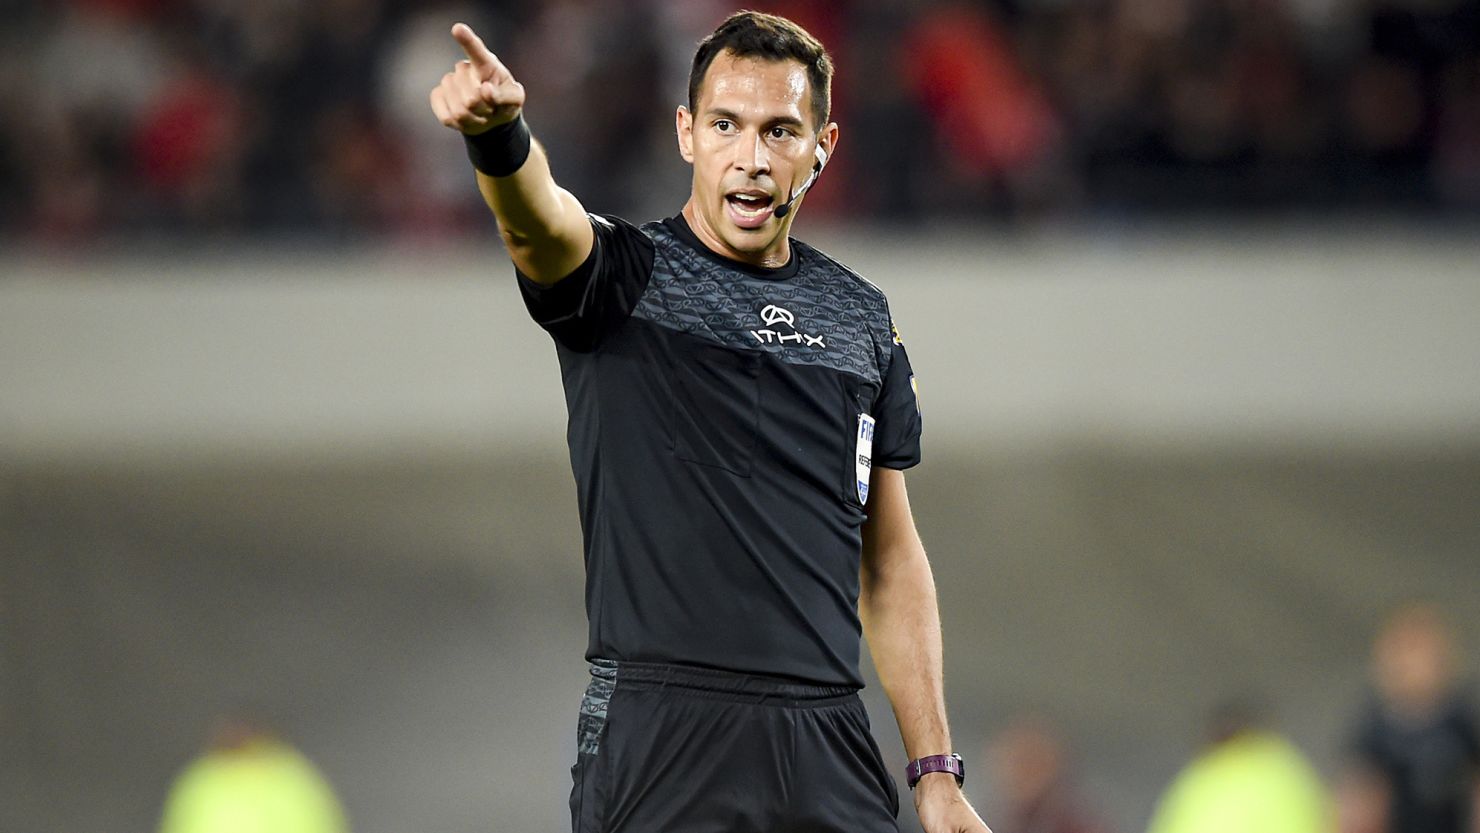 Facundo Tello was the referee for the Argentina's Champions Trophy final between Racing Club and Boca Juniors.